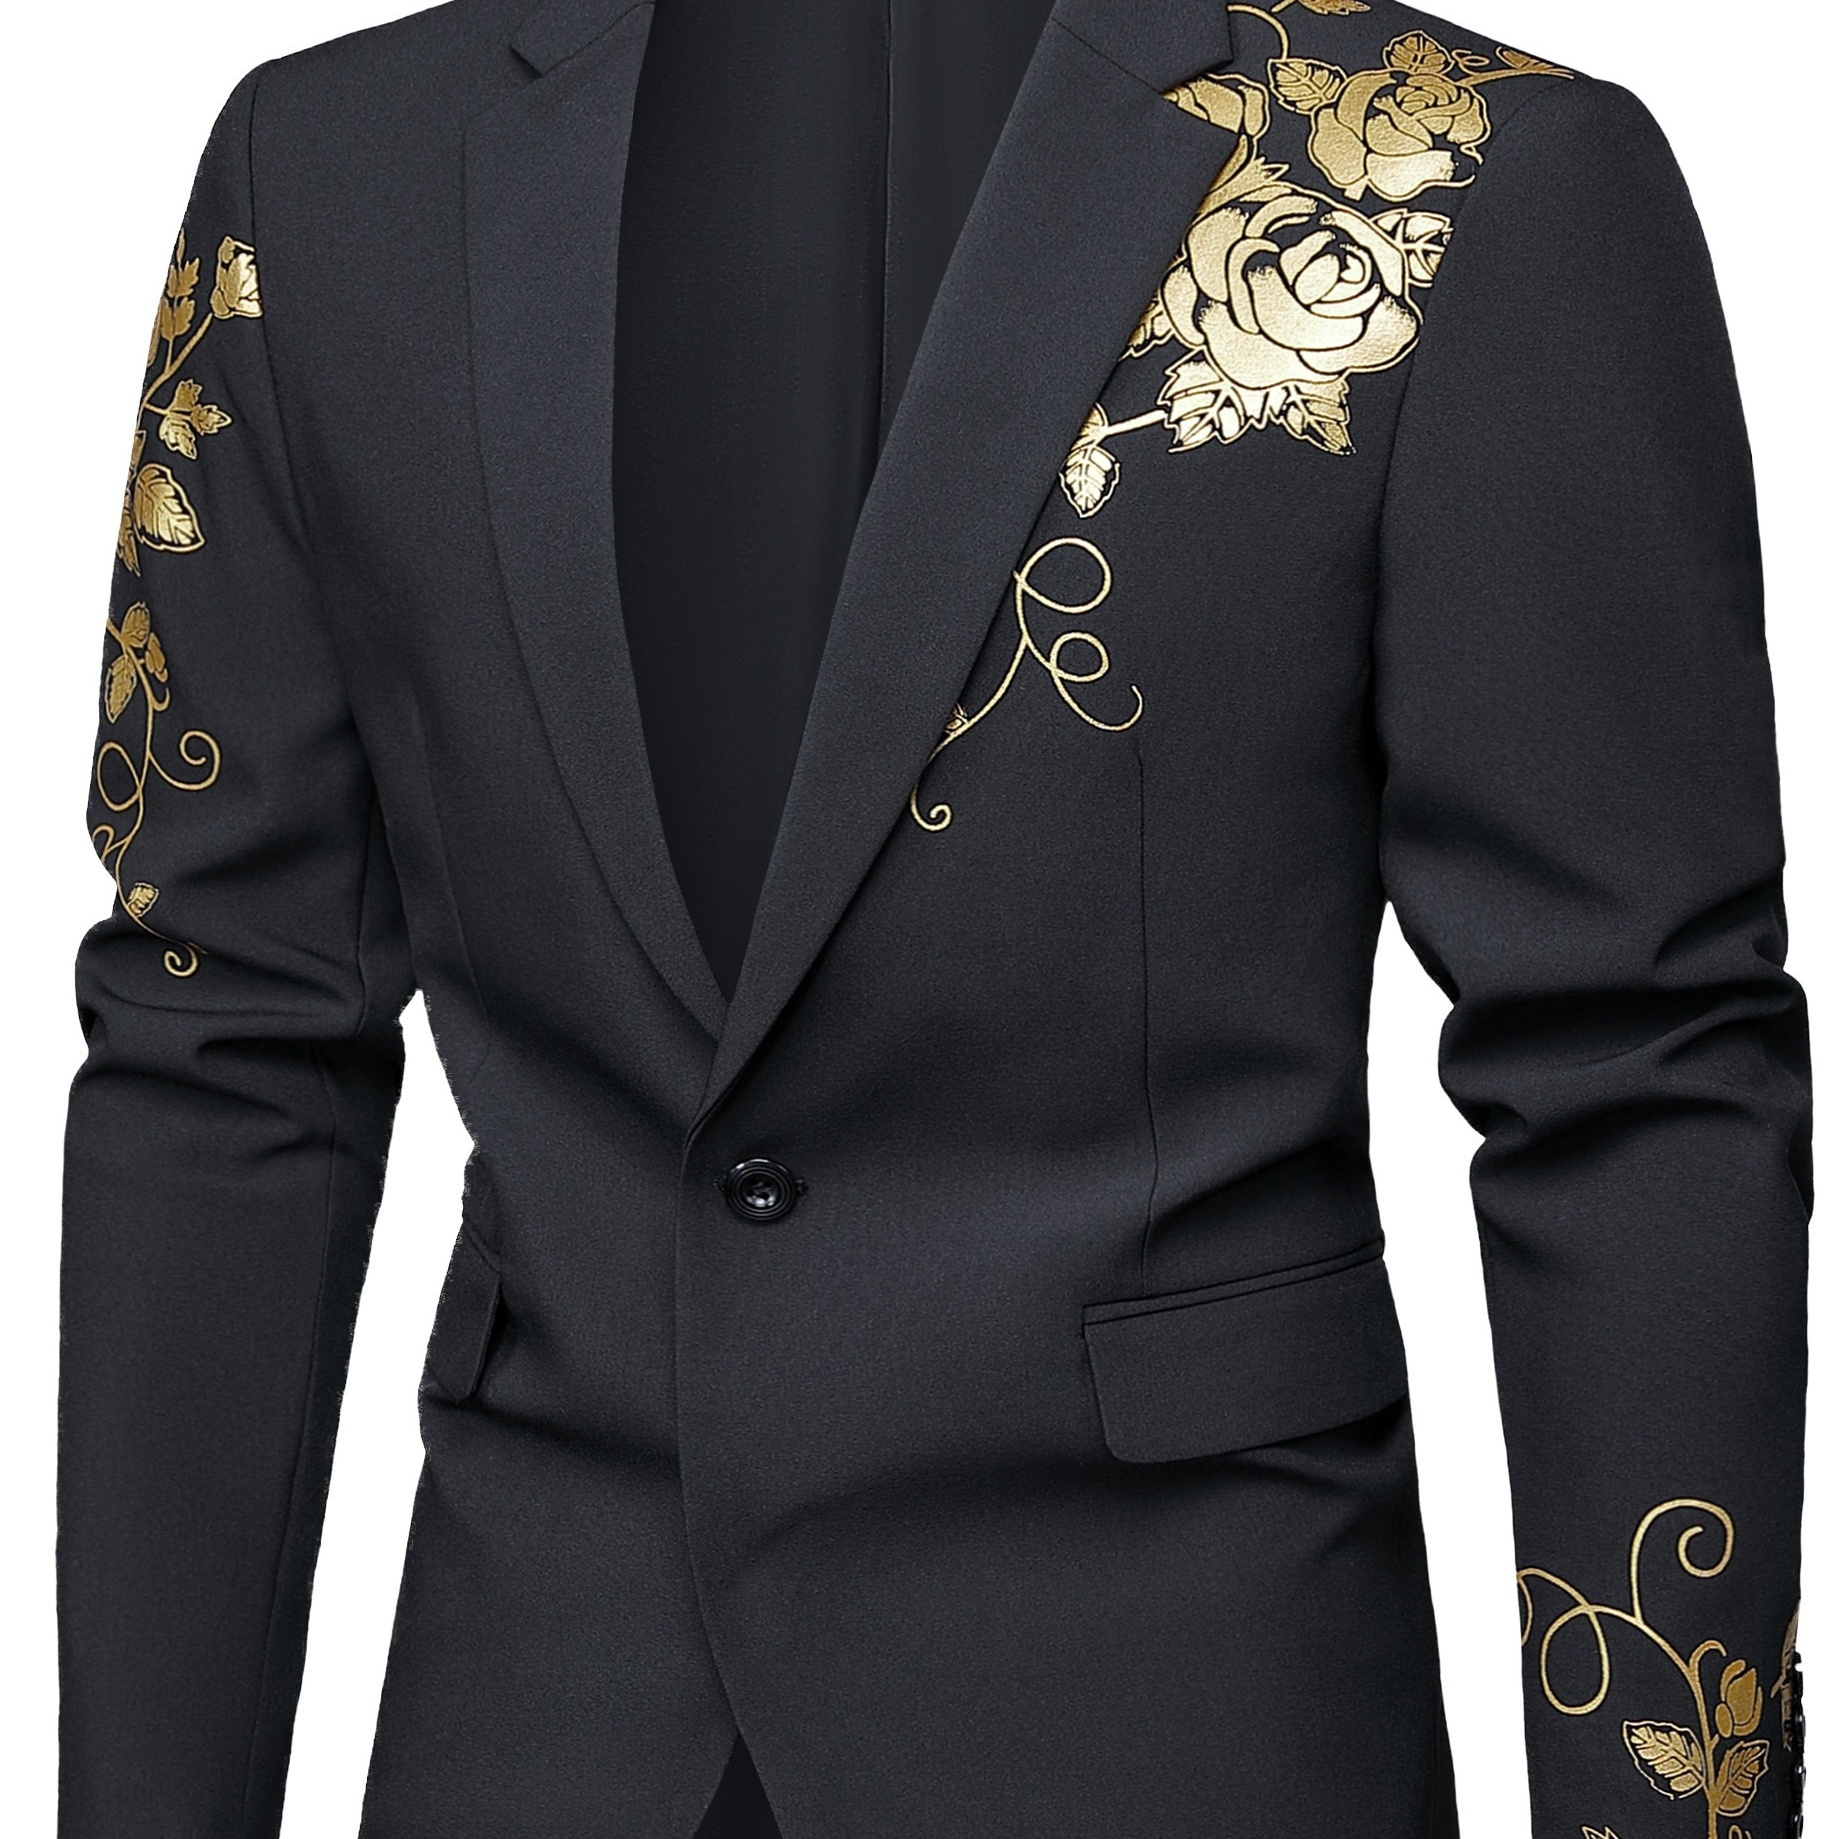 

Men's Casual Stylish Suit Jacket, 1 Button Floral Pattern Fashionable Blazer With Pockets, Suitable For Party\ Dance\ Dinner\ Wedding\ Business Banquet, Gift For Men.